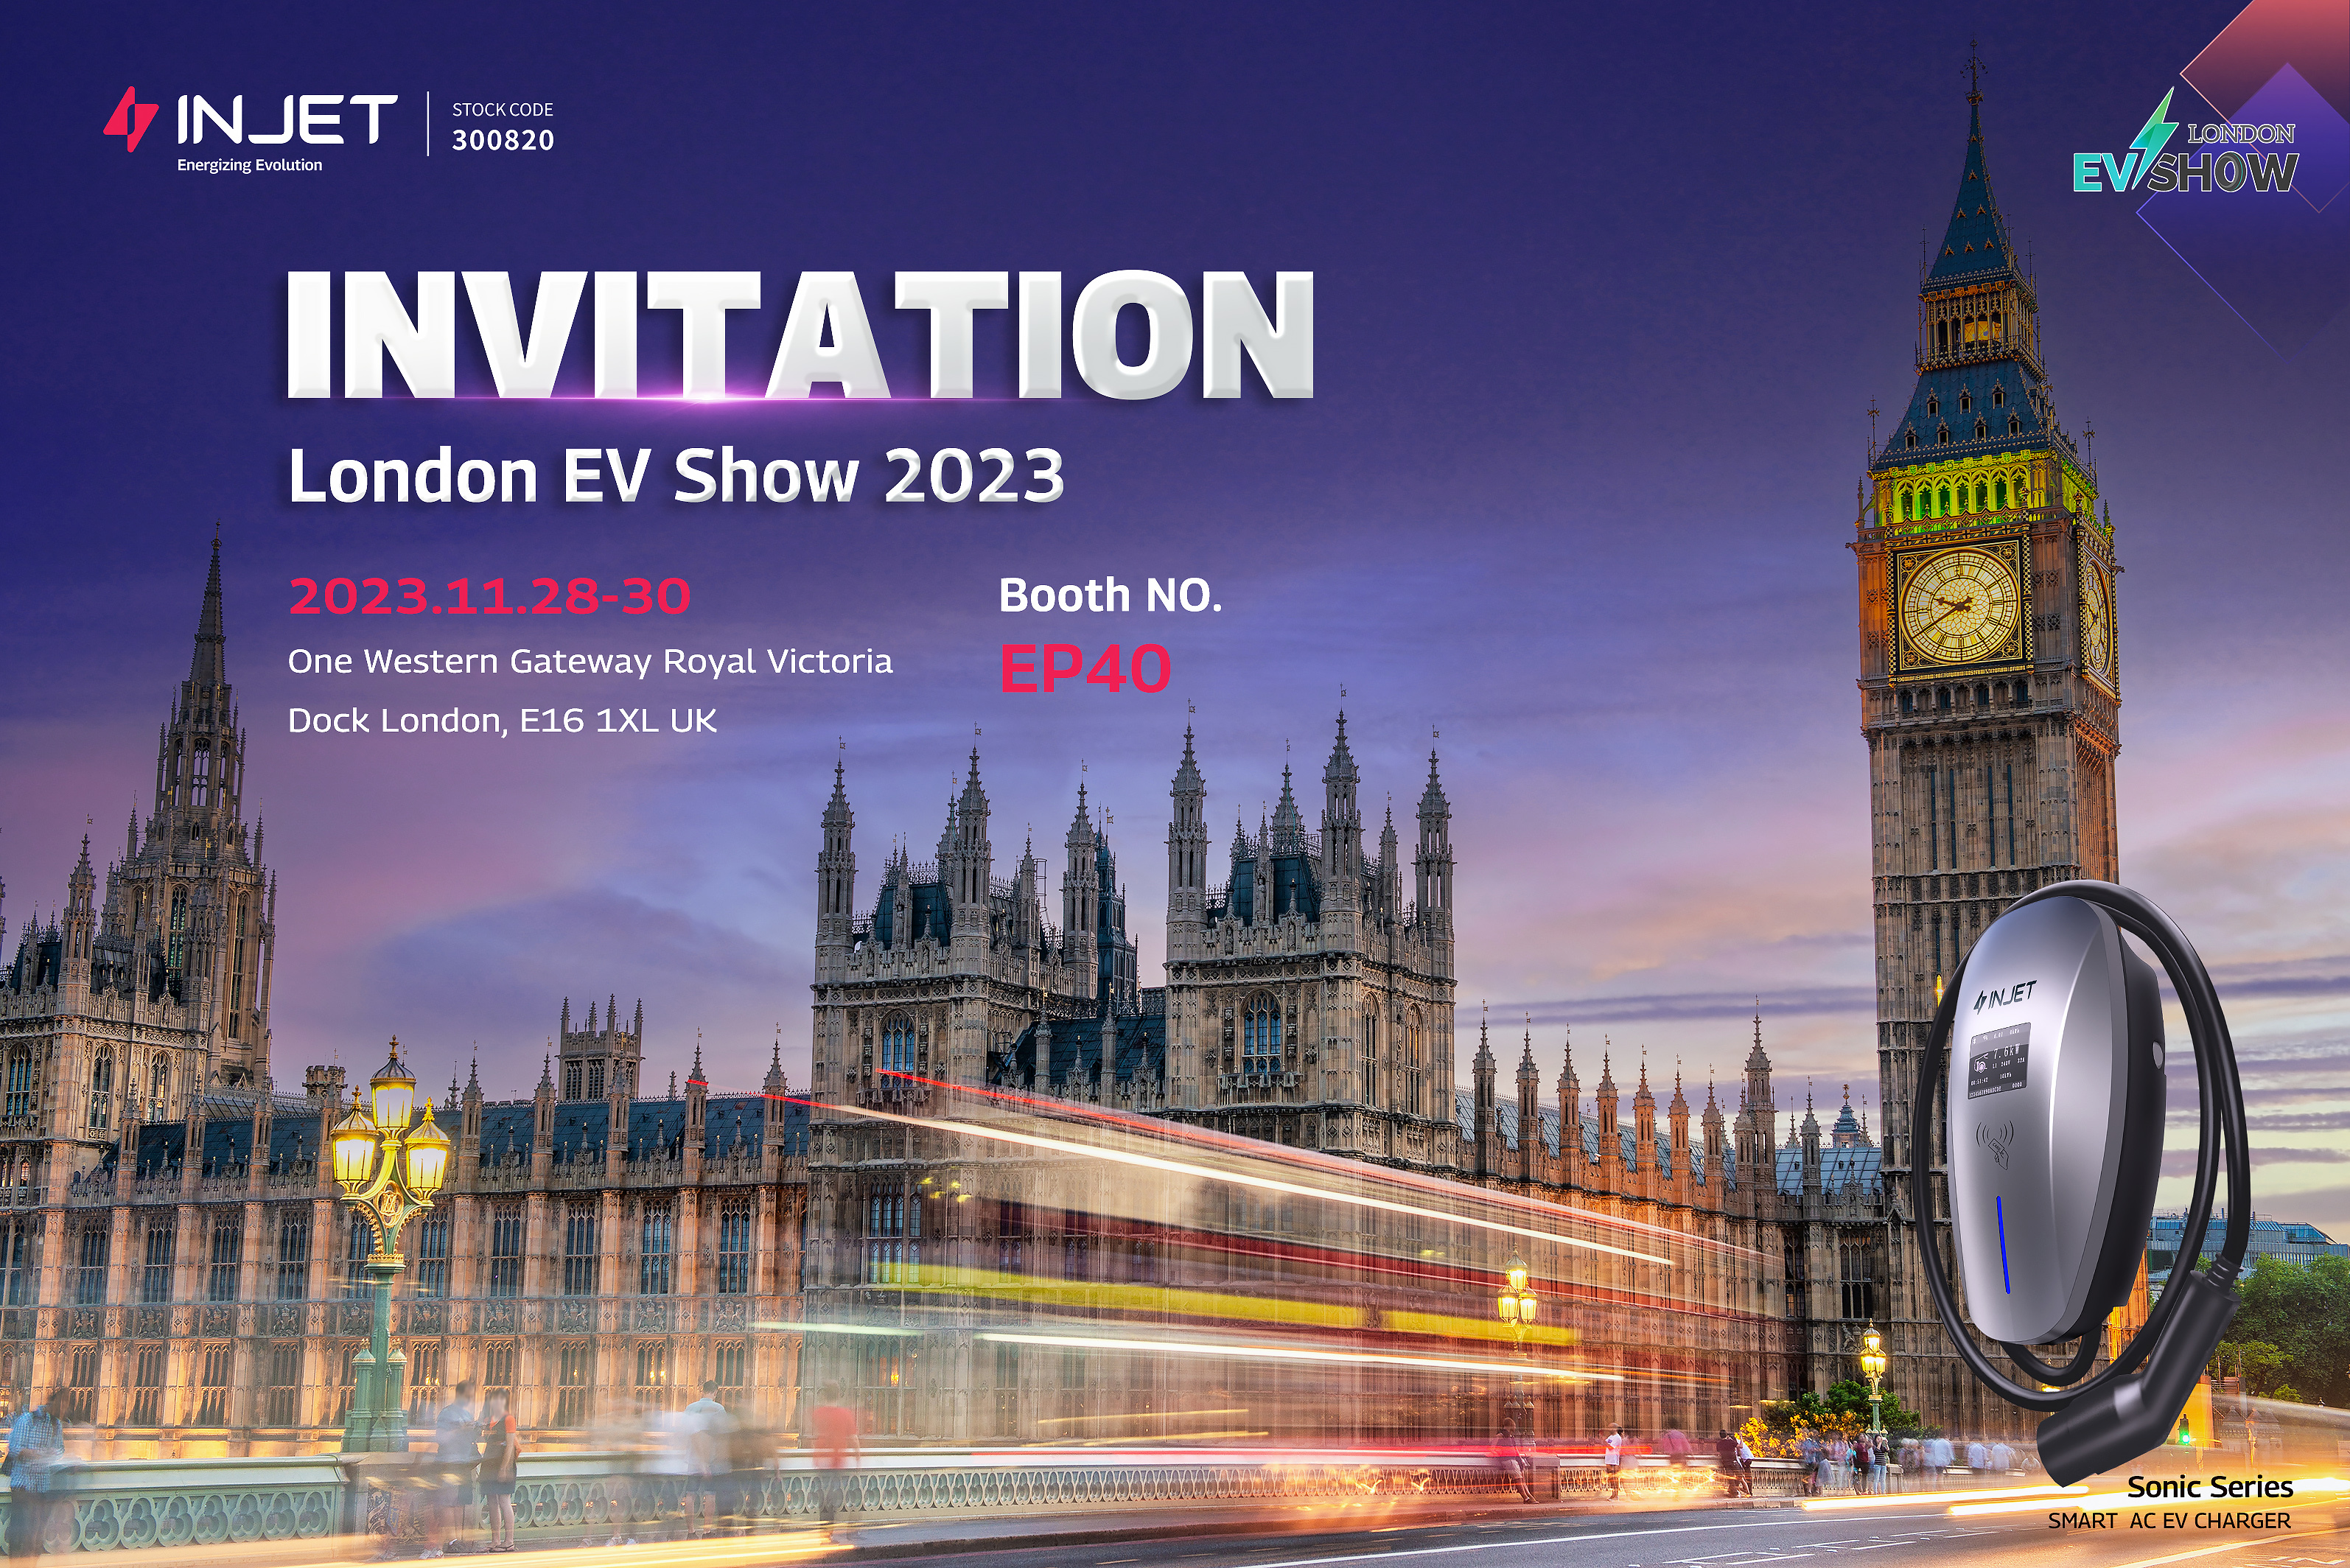 Exciting News from Injet New Energy – Join us at the London EV Show 2023!